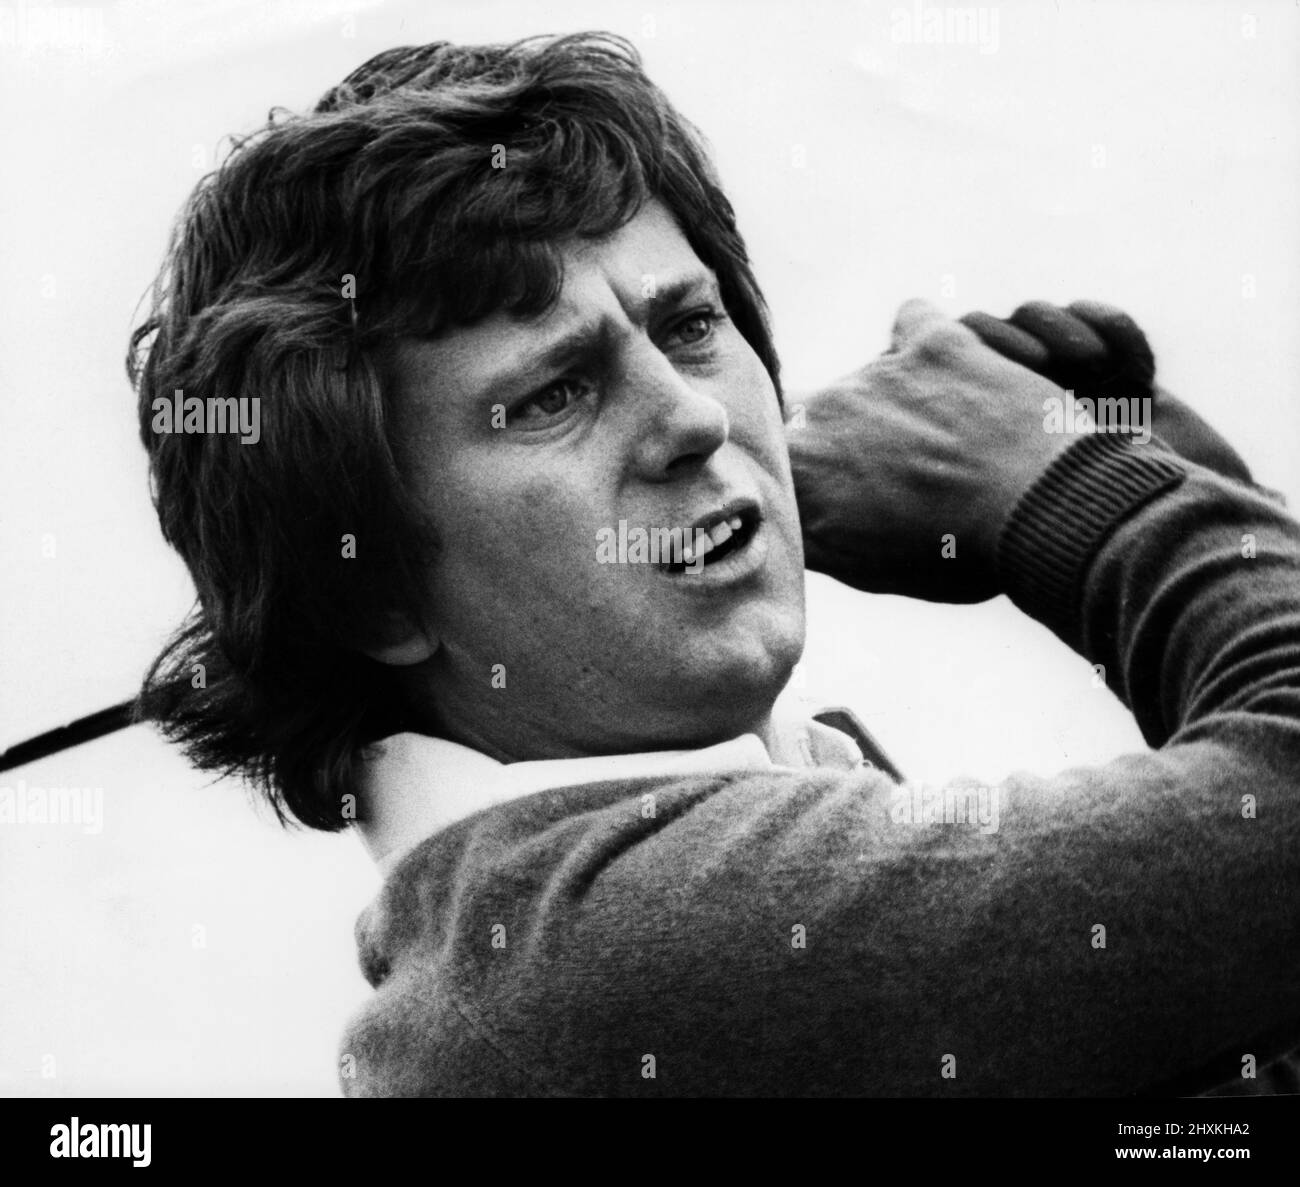 Doug McClelland, studies the line of his putt during the 72 holes Callers 25,000 pound golf tournament at Whitley Bay, this week, pictured 28th July 1977. Stock Photo